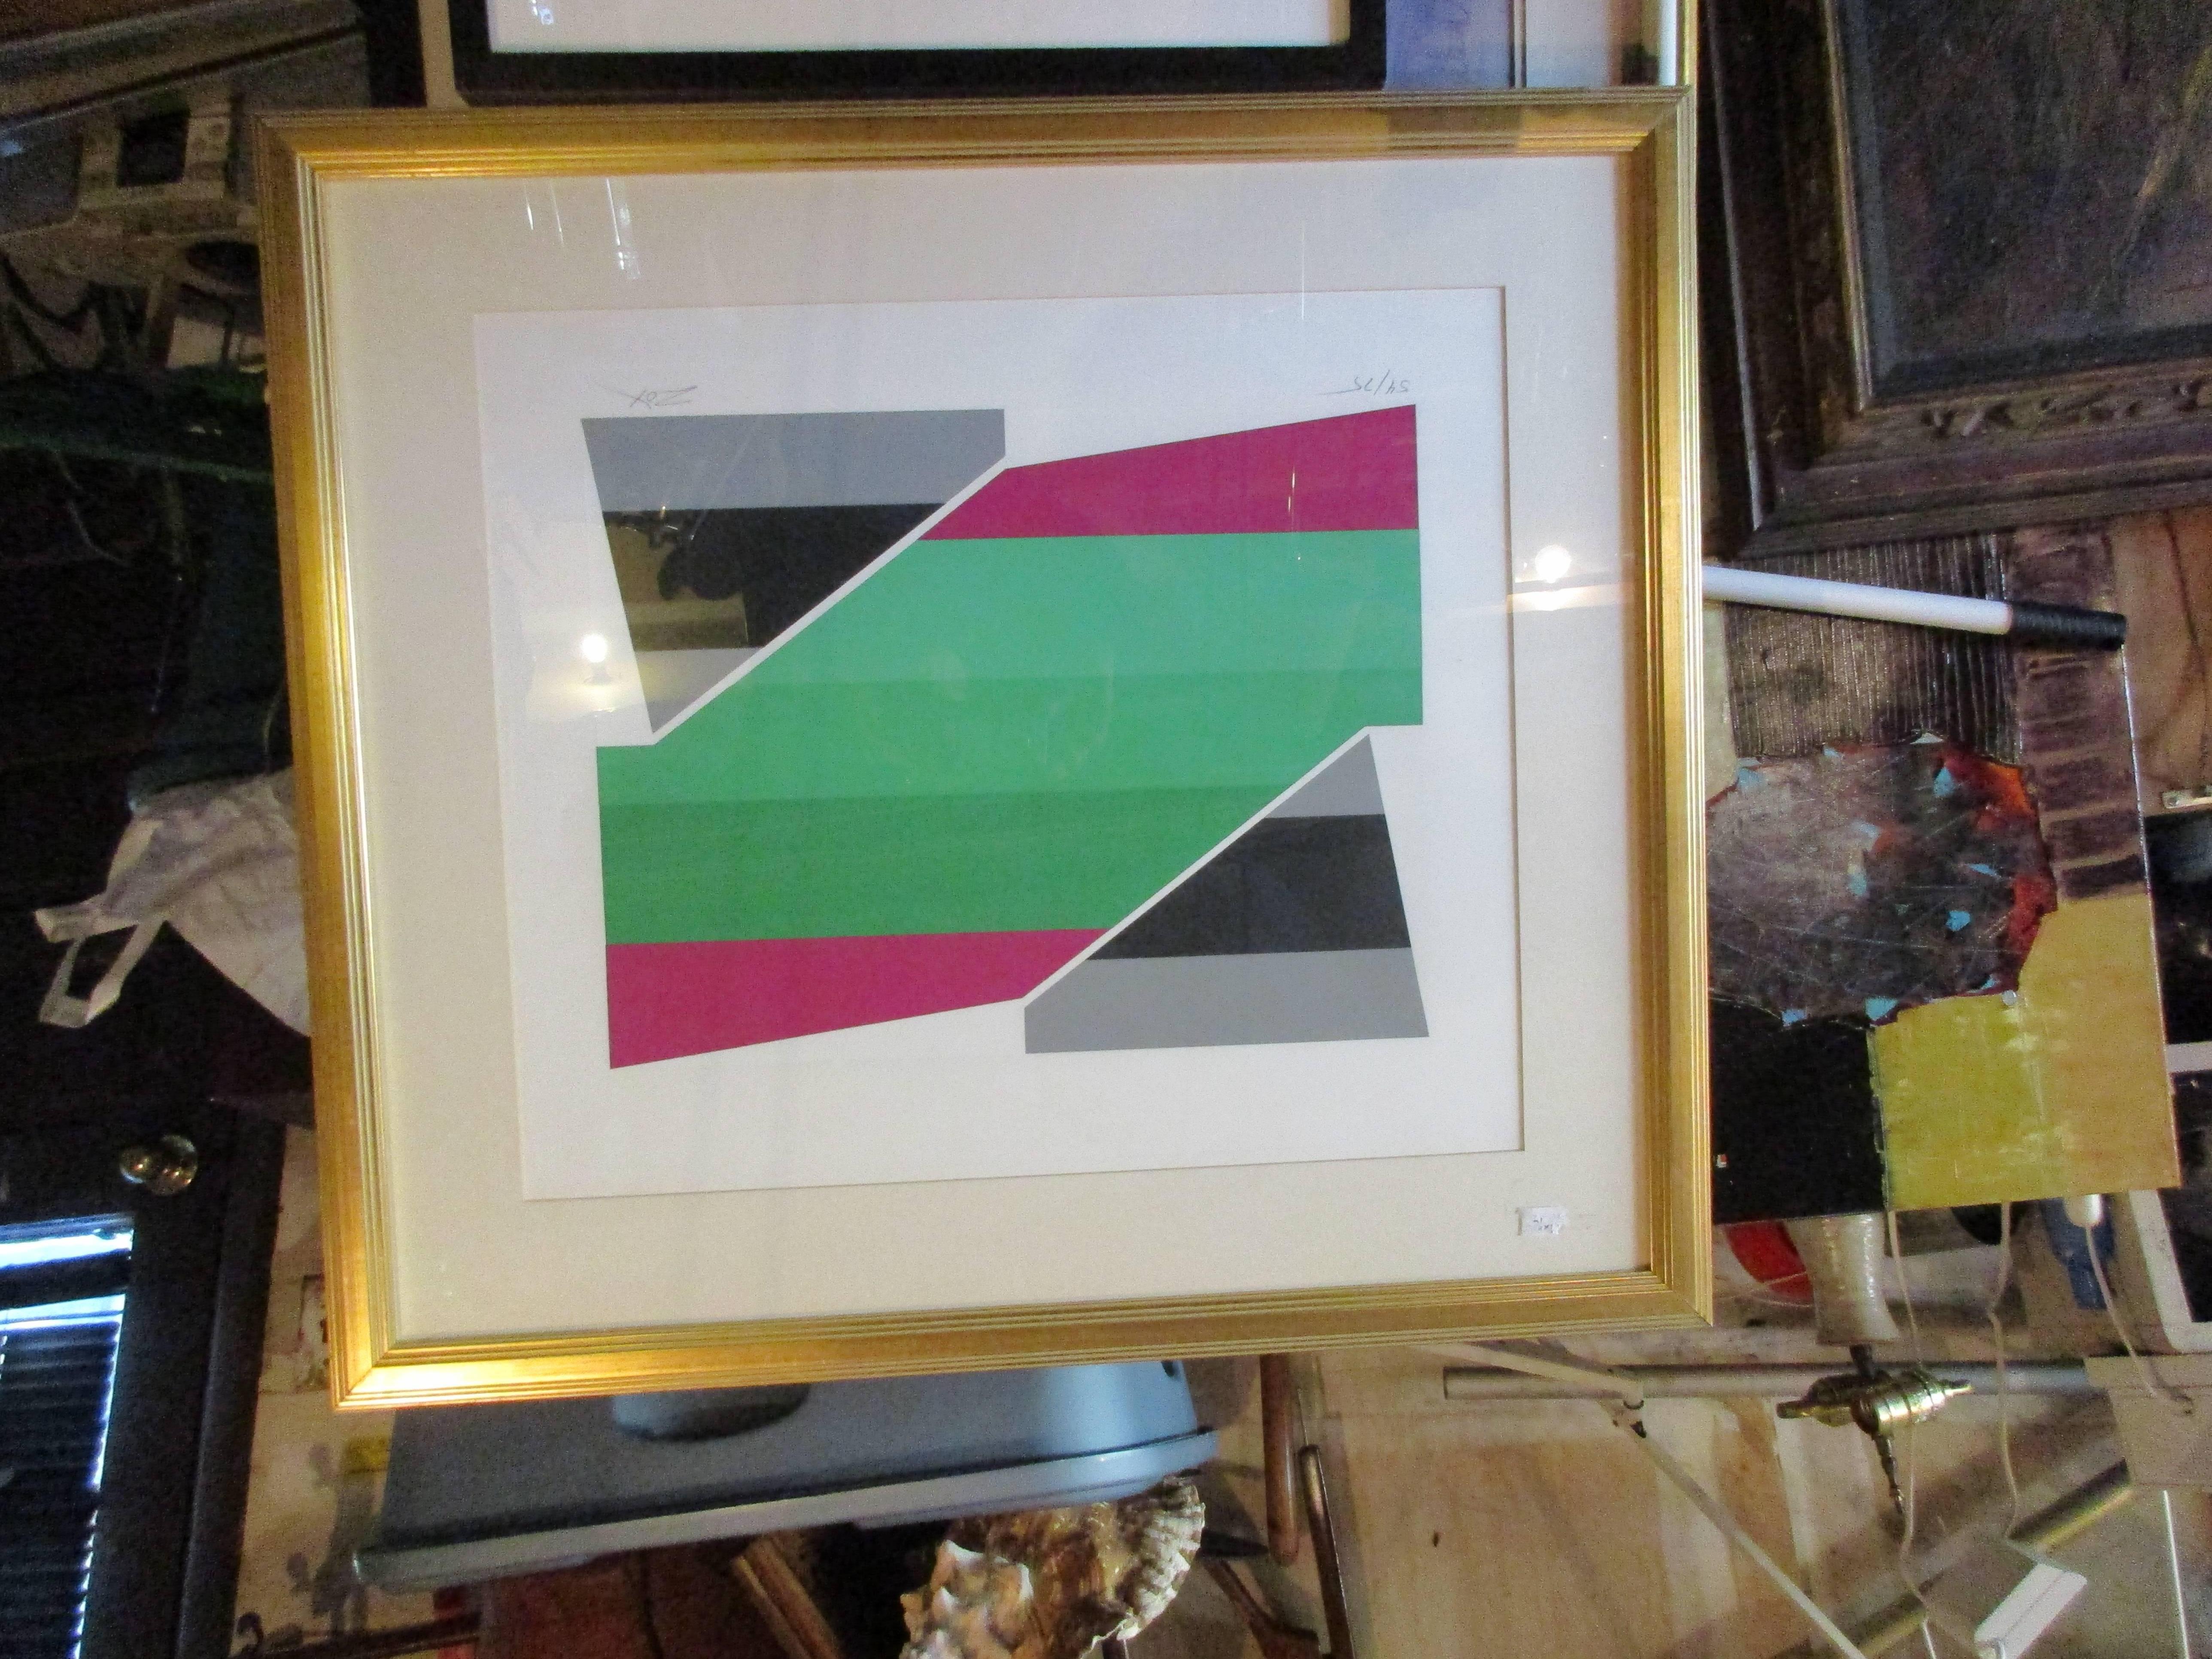 Pair of Larry Zox silksceens signed and each numbered 54/75 giltwood frames
size of top silkscreen H 28.75 x W24 x W 1.5.